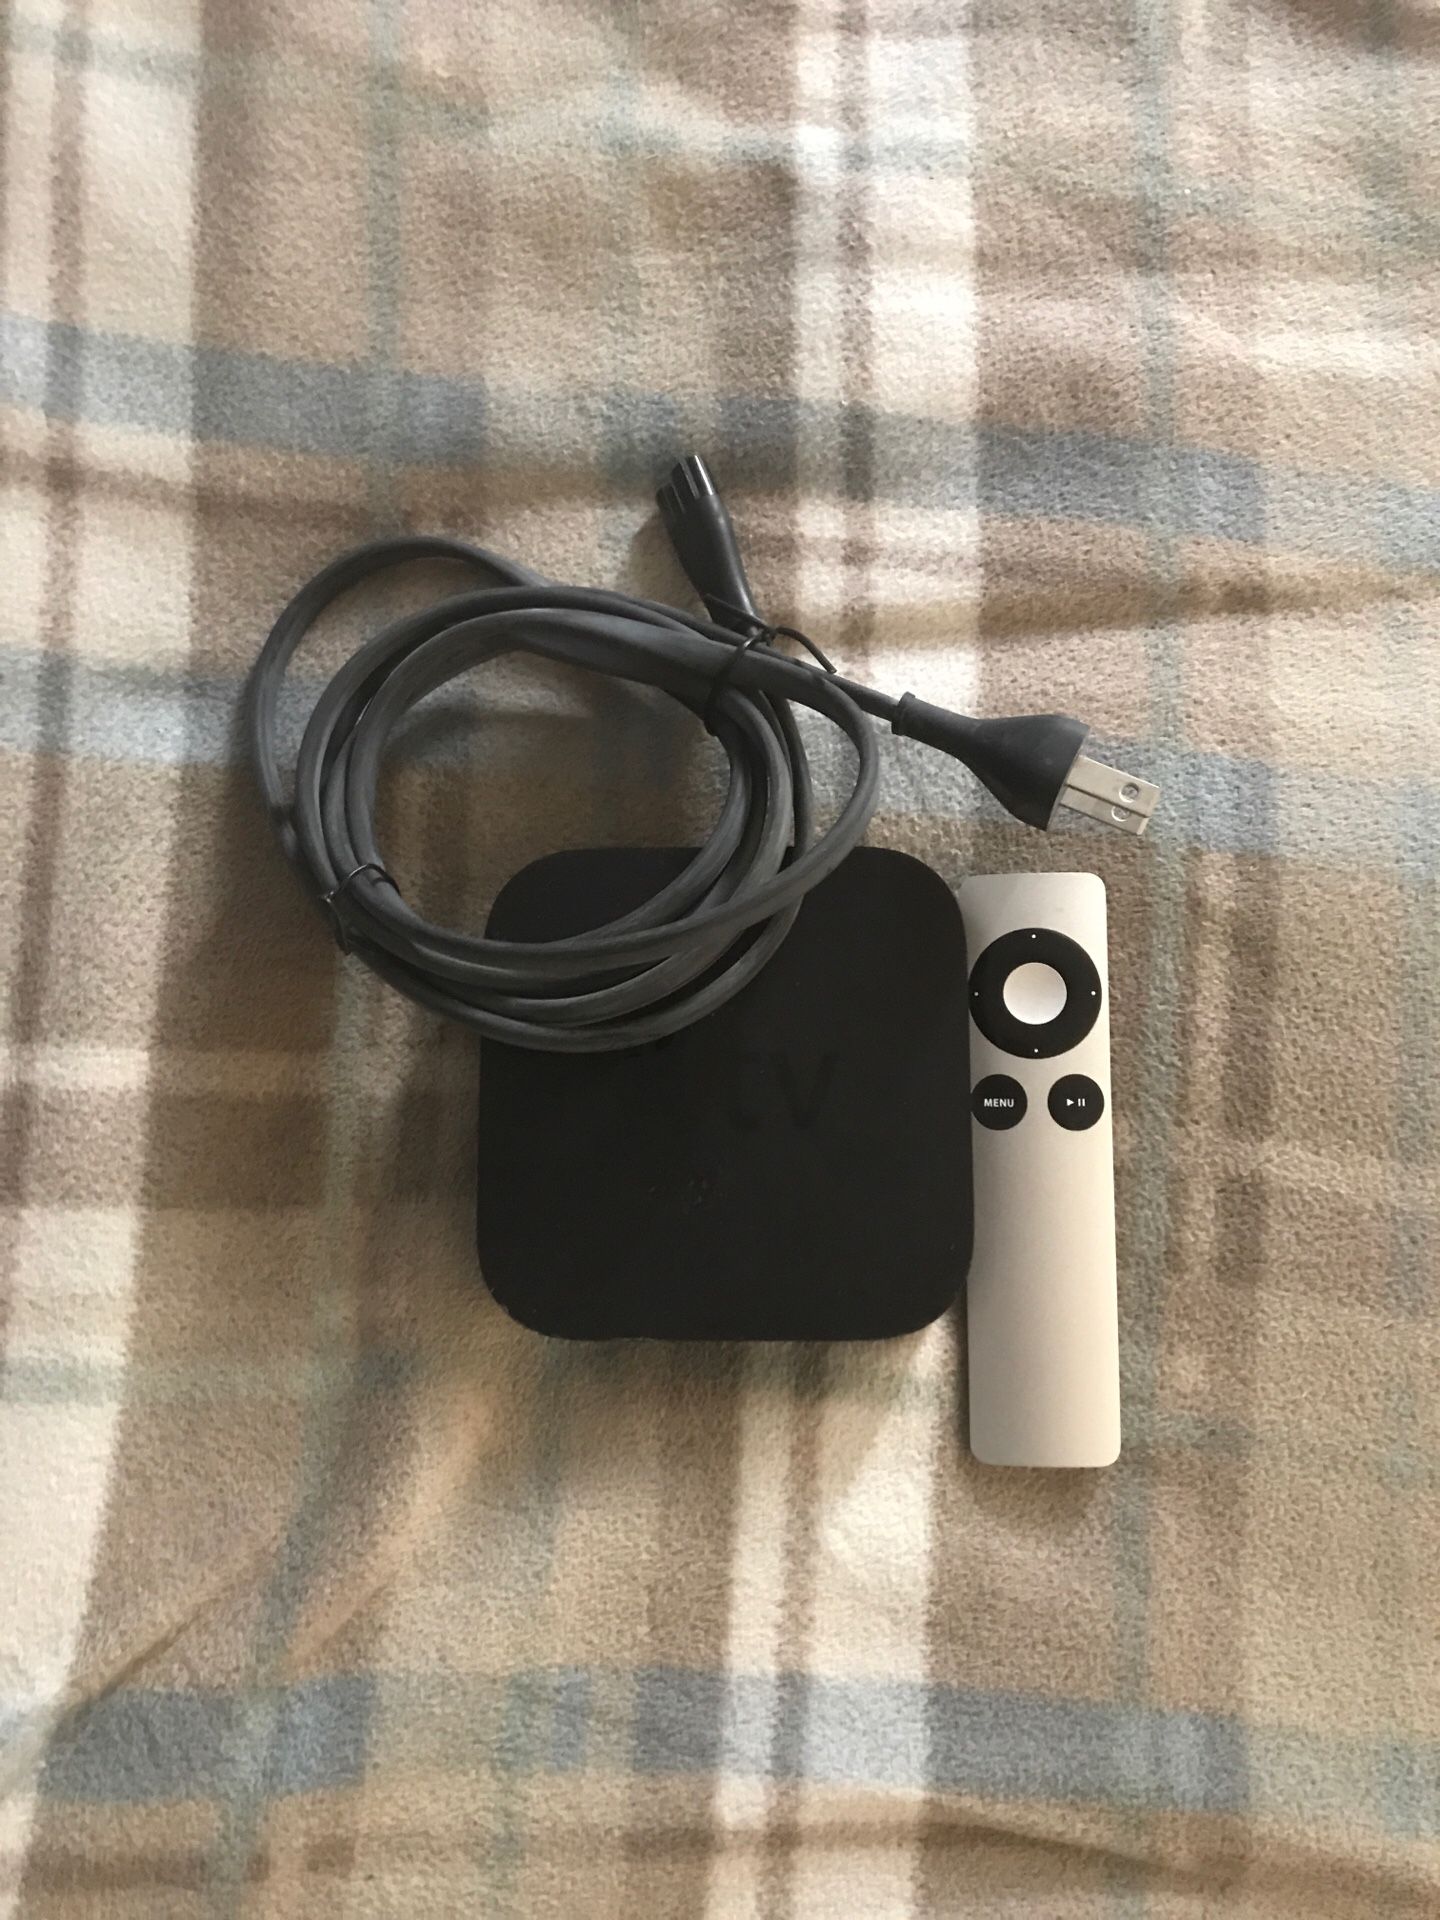 32GB Apple TV with remote